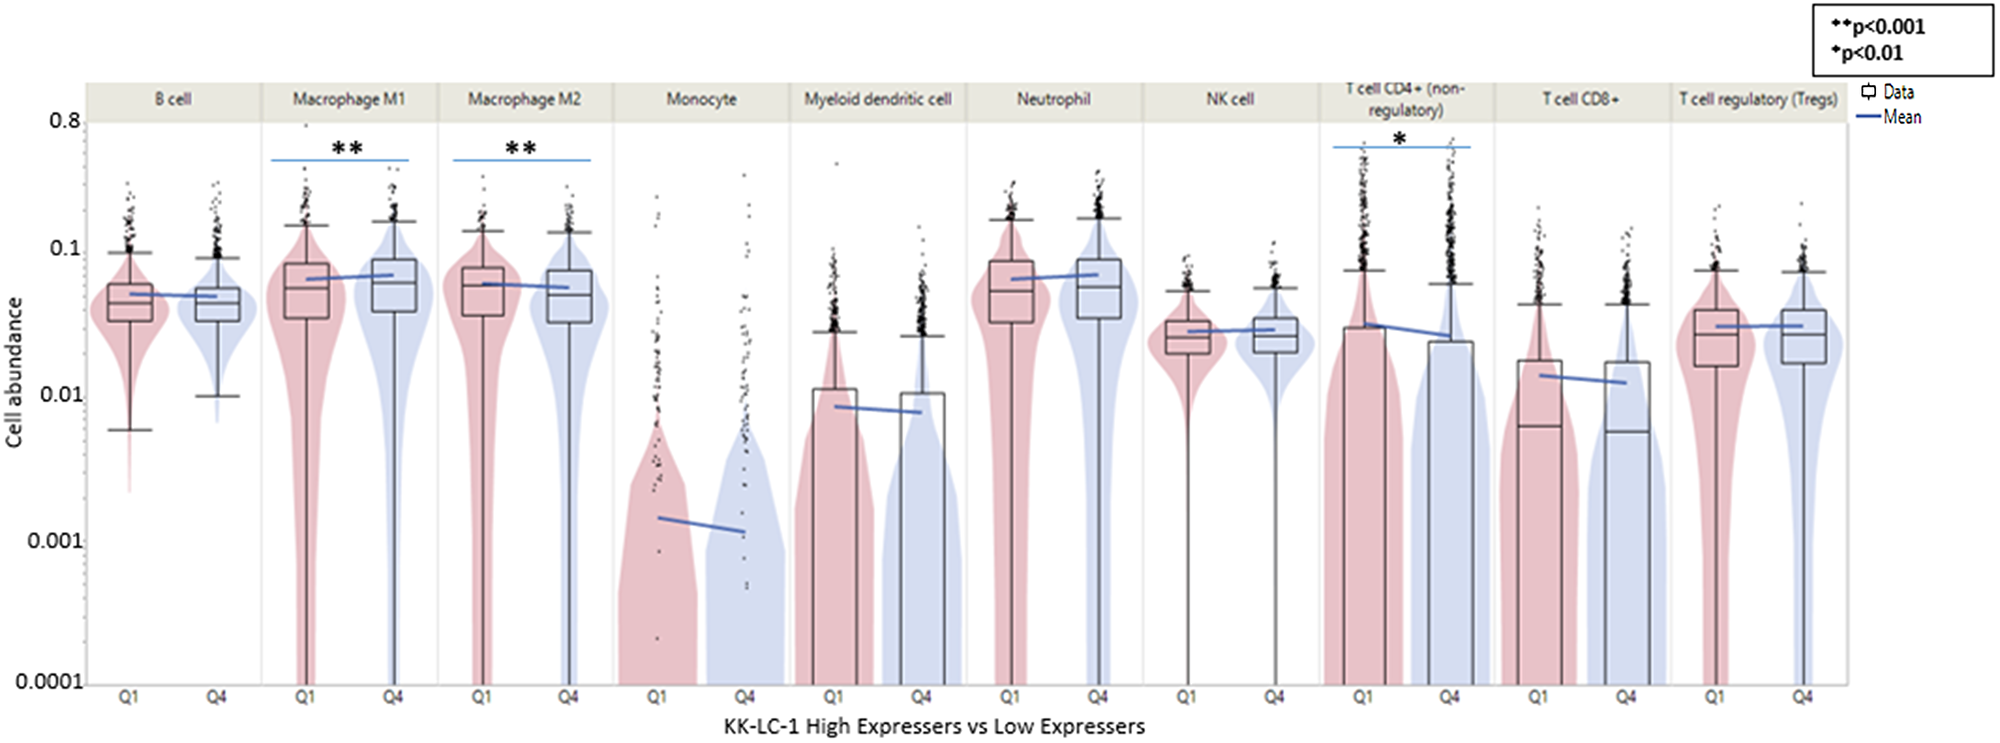 Figure 5: Tumor microenvironment in KK-LC-1 high vs low expressing (Q4 vs. Q1) in adenocarcinomas as measured by immune cell fraction calculated by QuantiSeq.